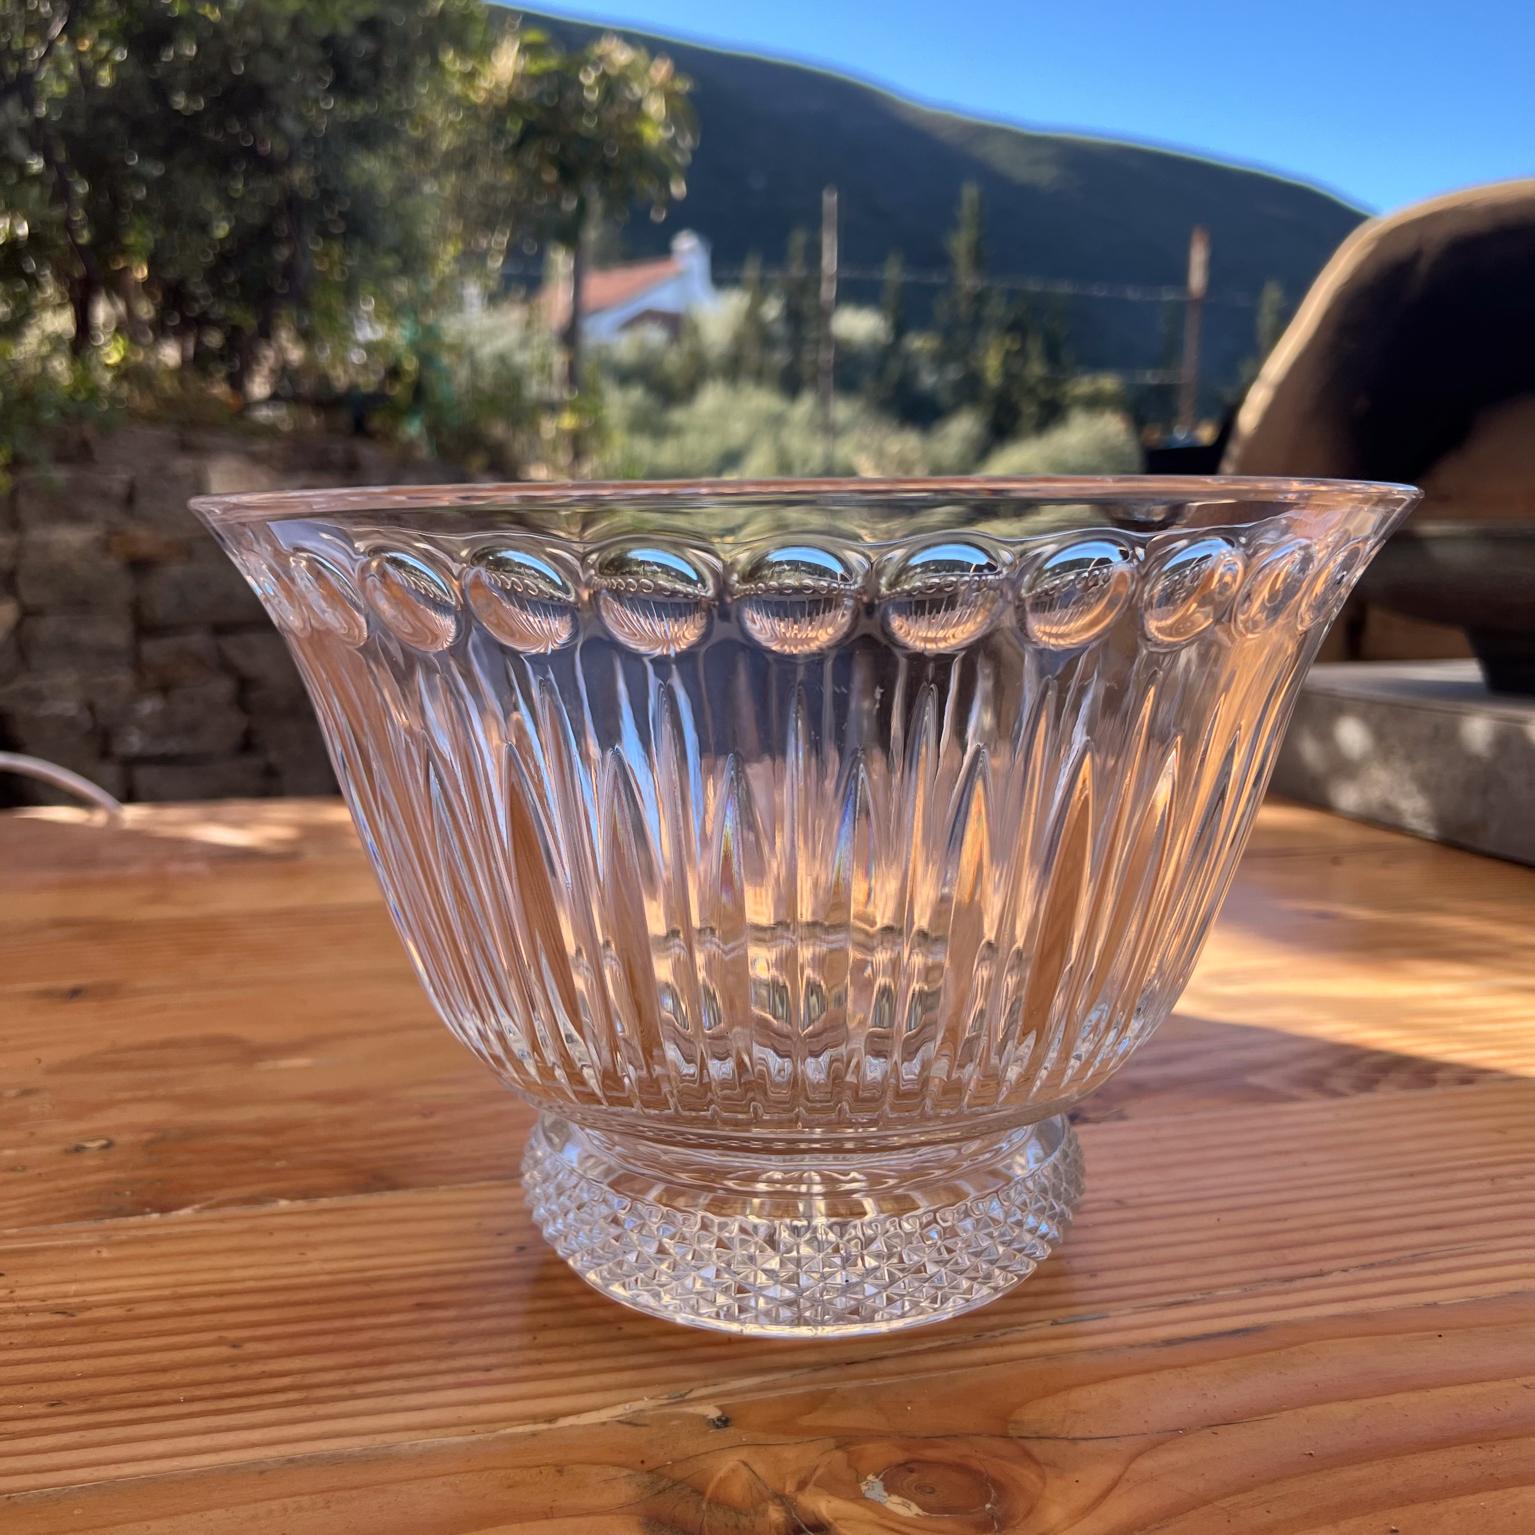 1990s Sutton Place Crystal Centerpiece Bowl by Godinger In Good Condition For Sale In Chula Vista, CA